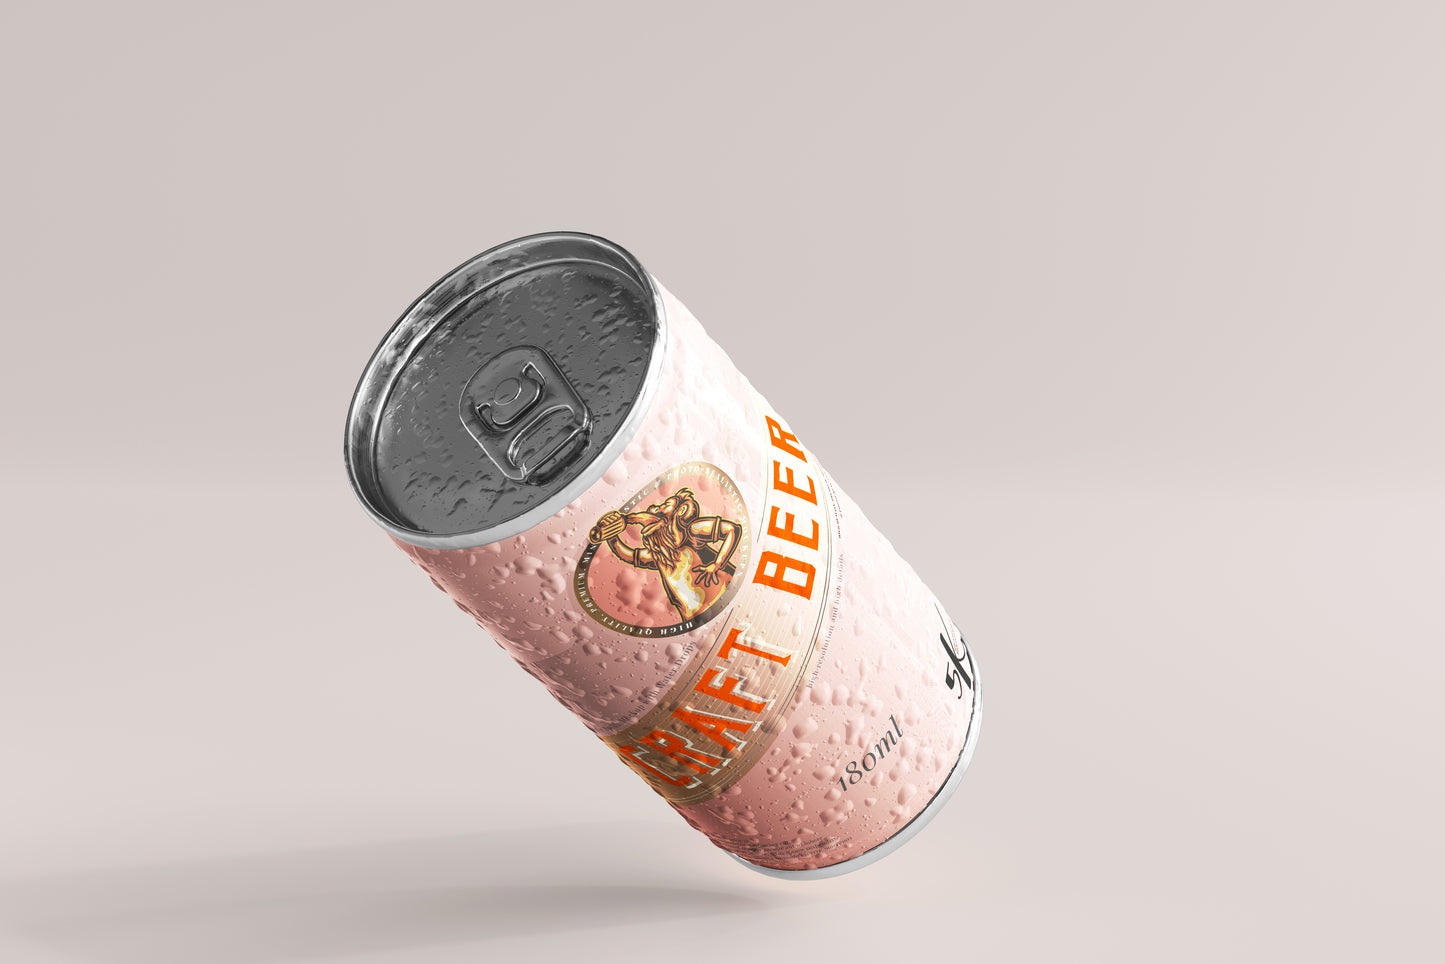 Small Soda or Beer Can Mockup with Condensation Effect